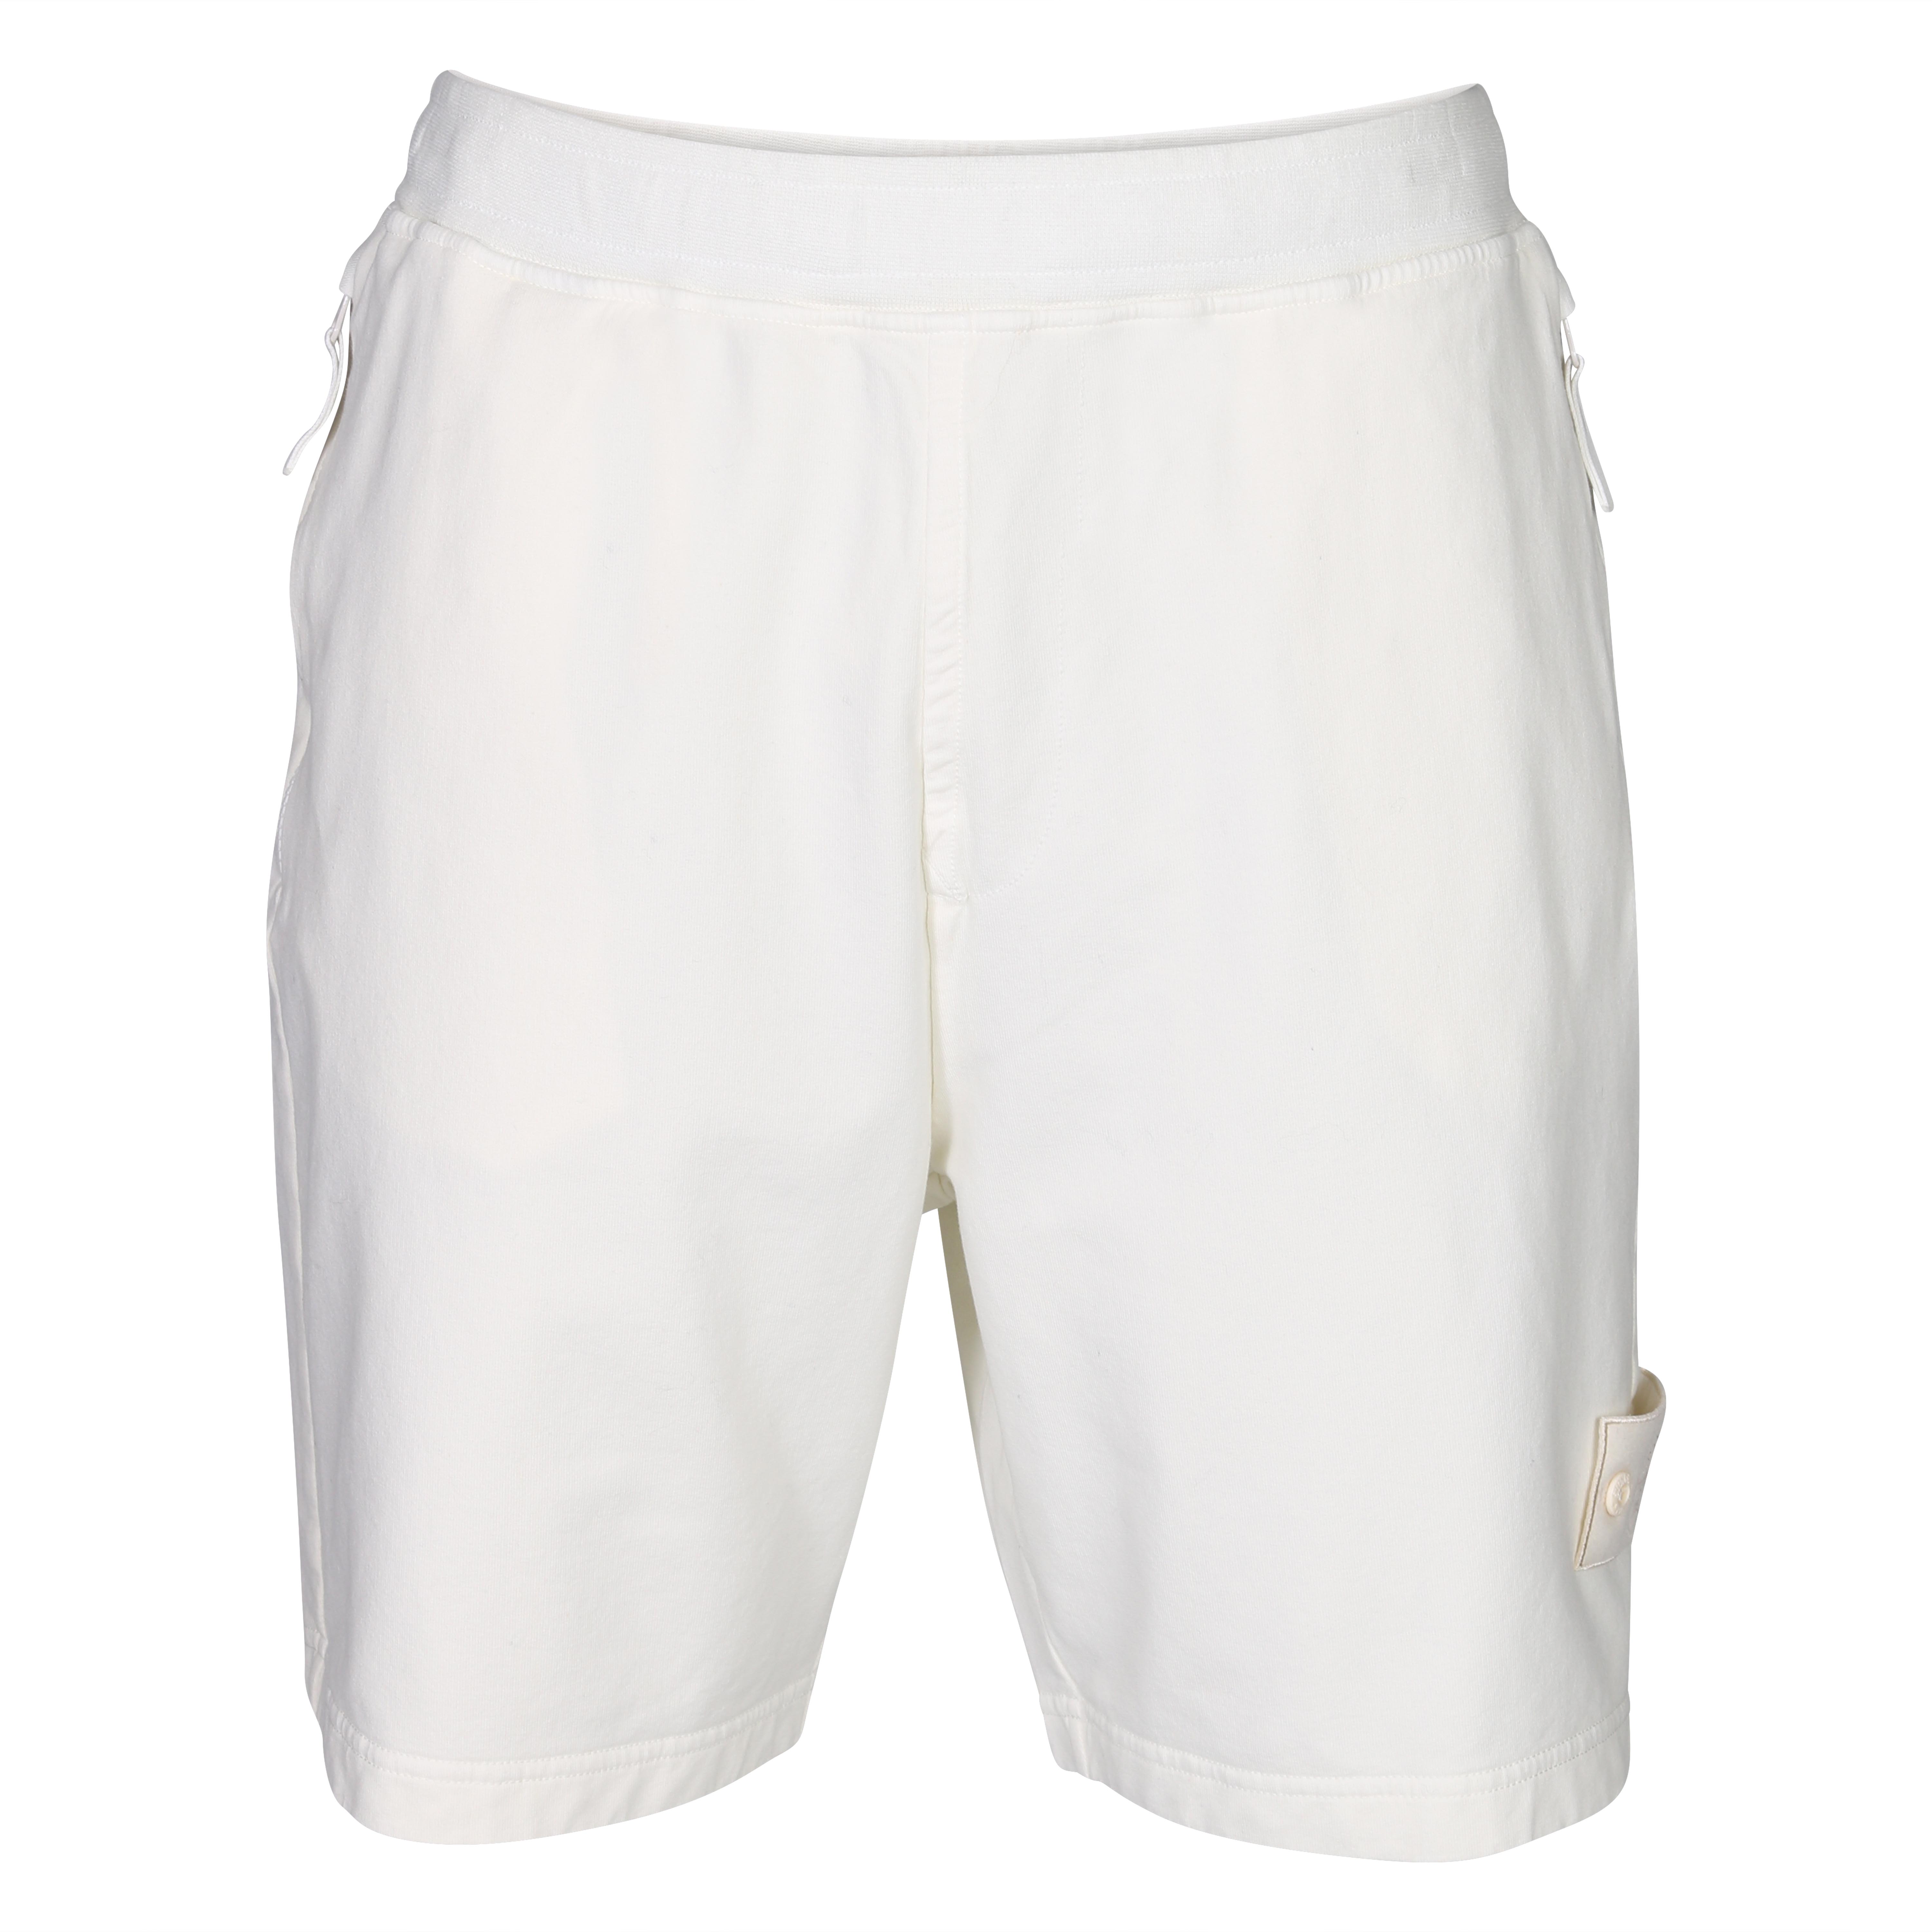 Stone Island Ghost Sweat Shorts in Off White S